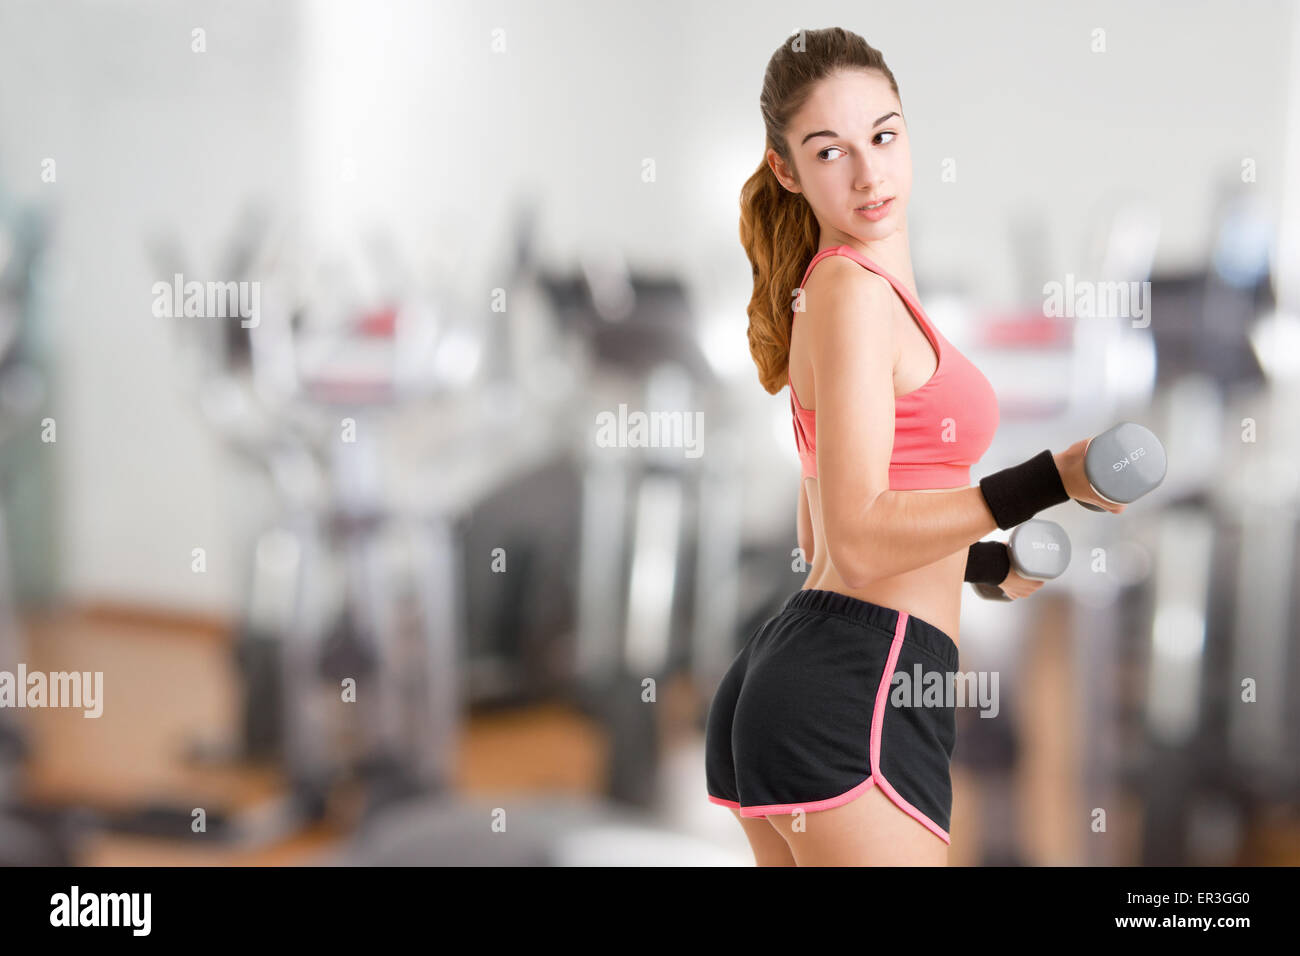 Woman working out with dumbbells at a gym Stock Photo